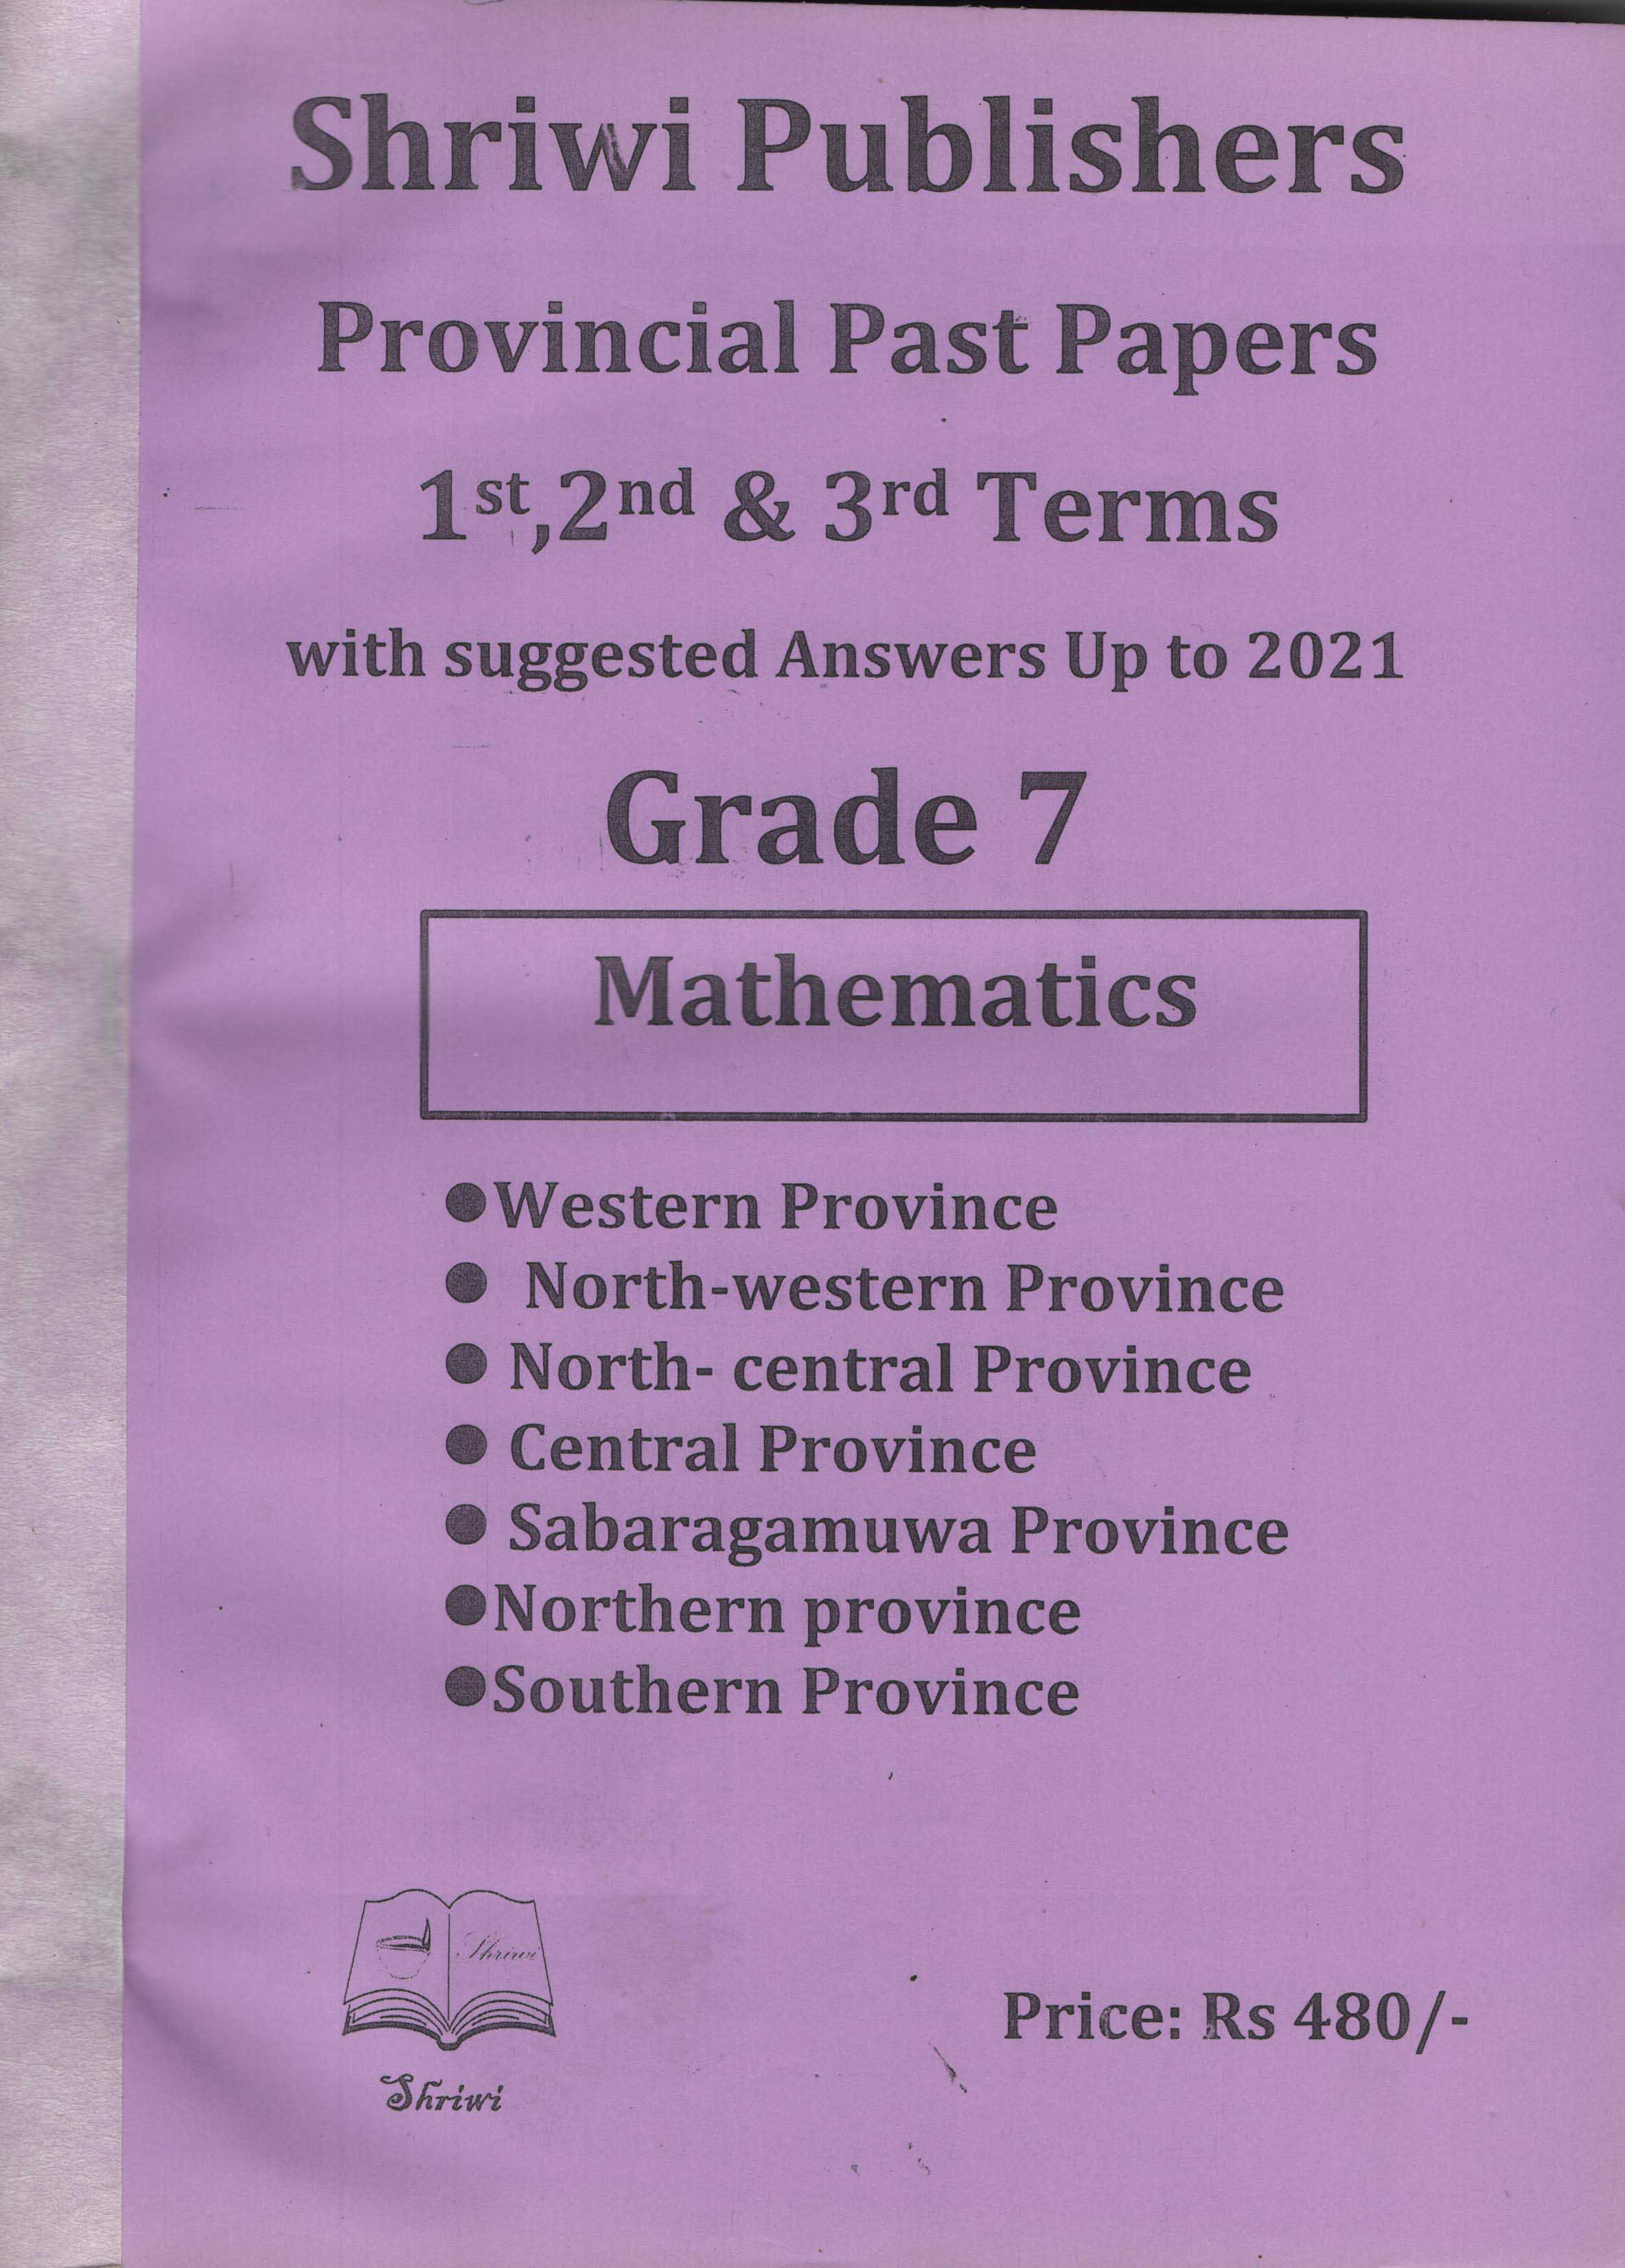 Shriwi Grade 7 Mathematics Provincial Past Papers 1st 2nd & 3rd Terms with Suggested Answers up to 2021